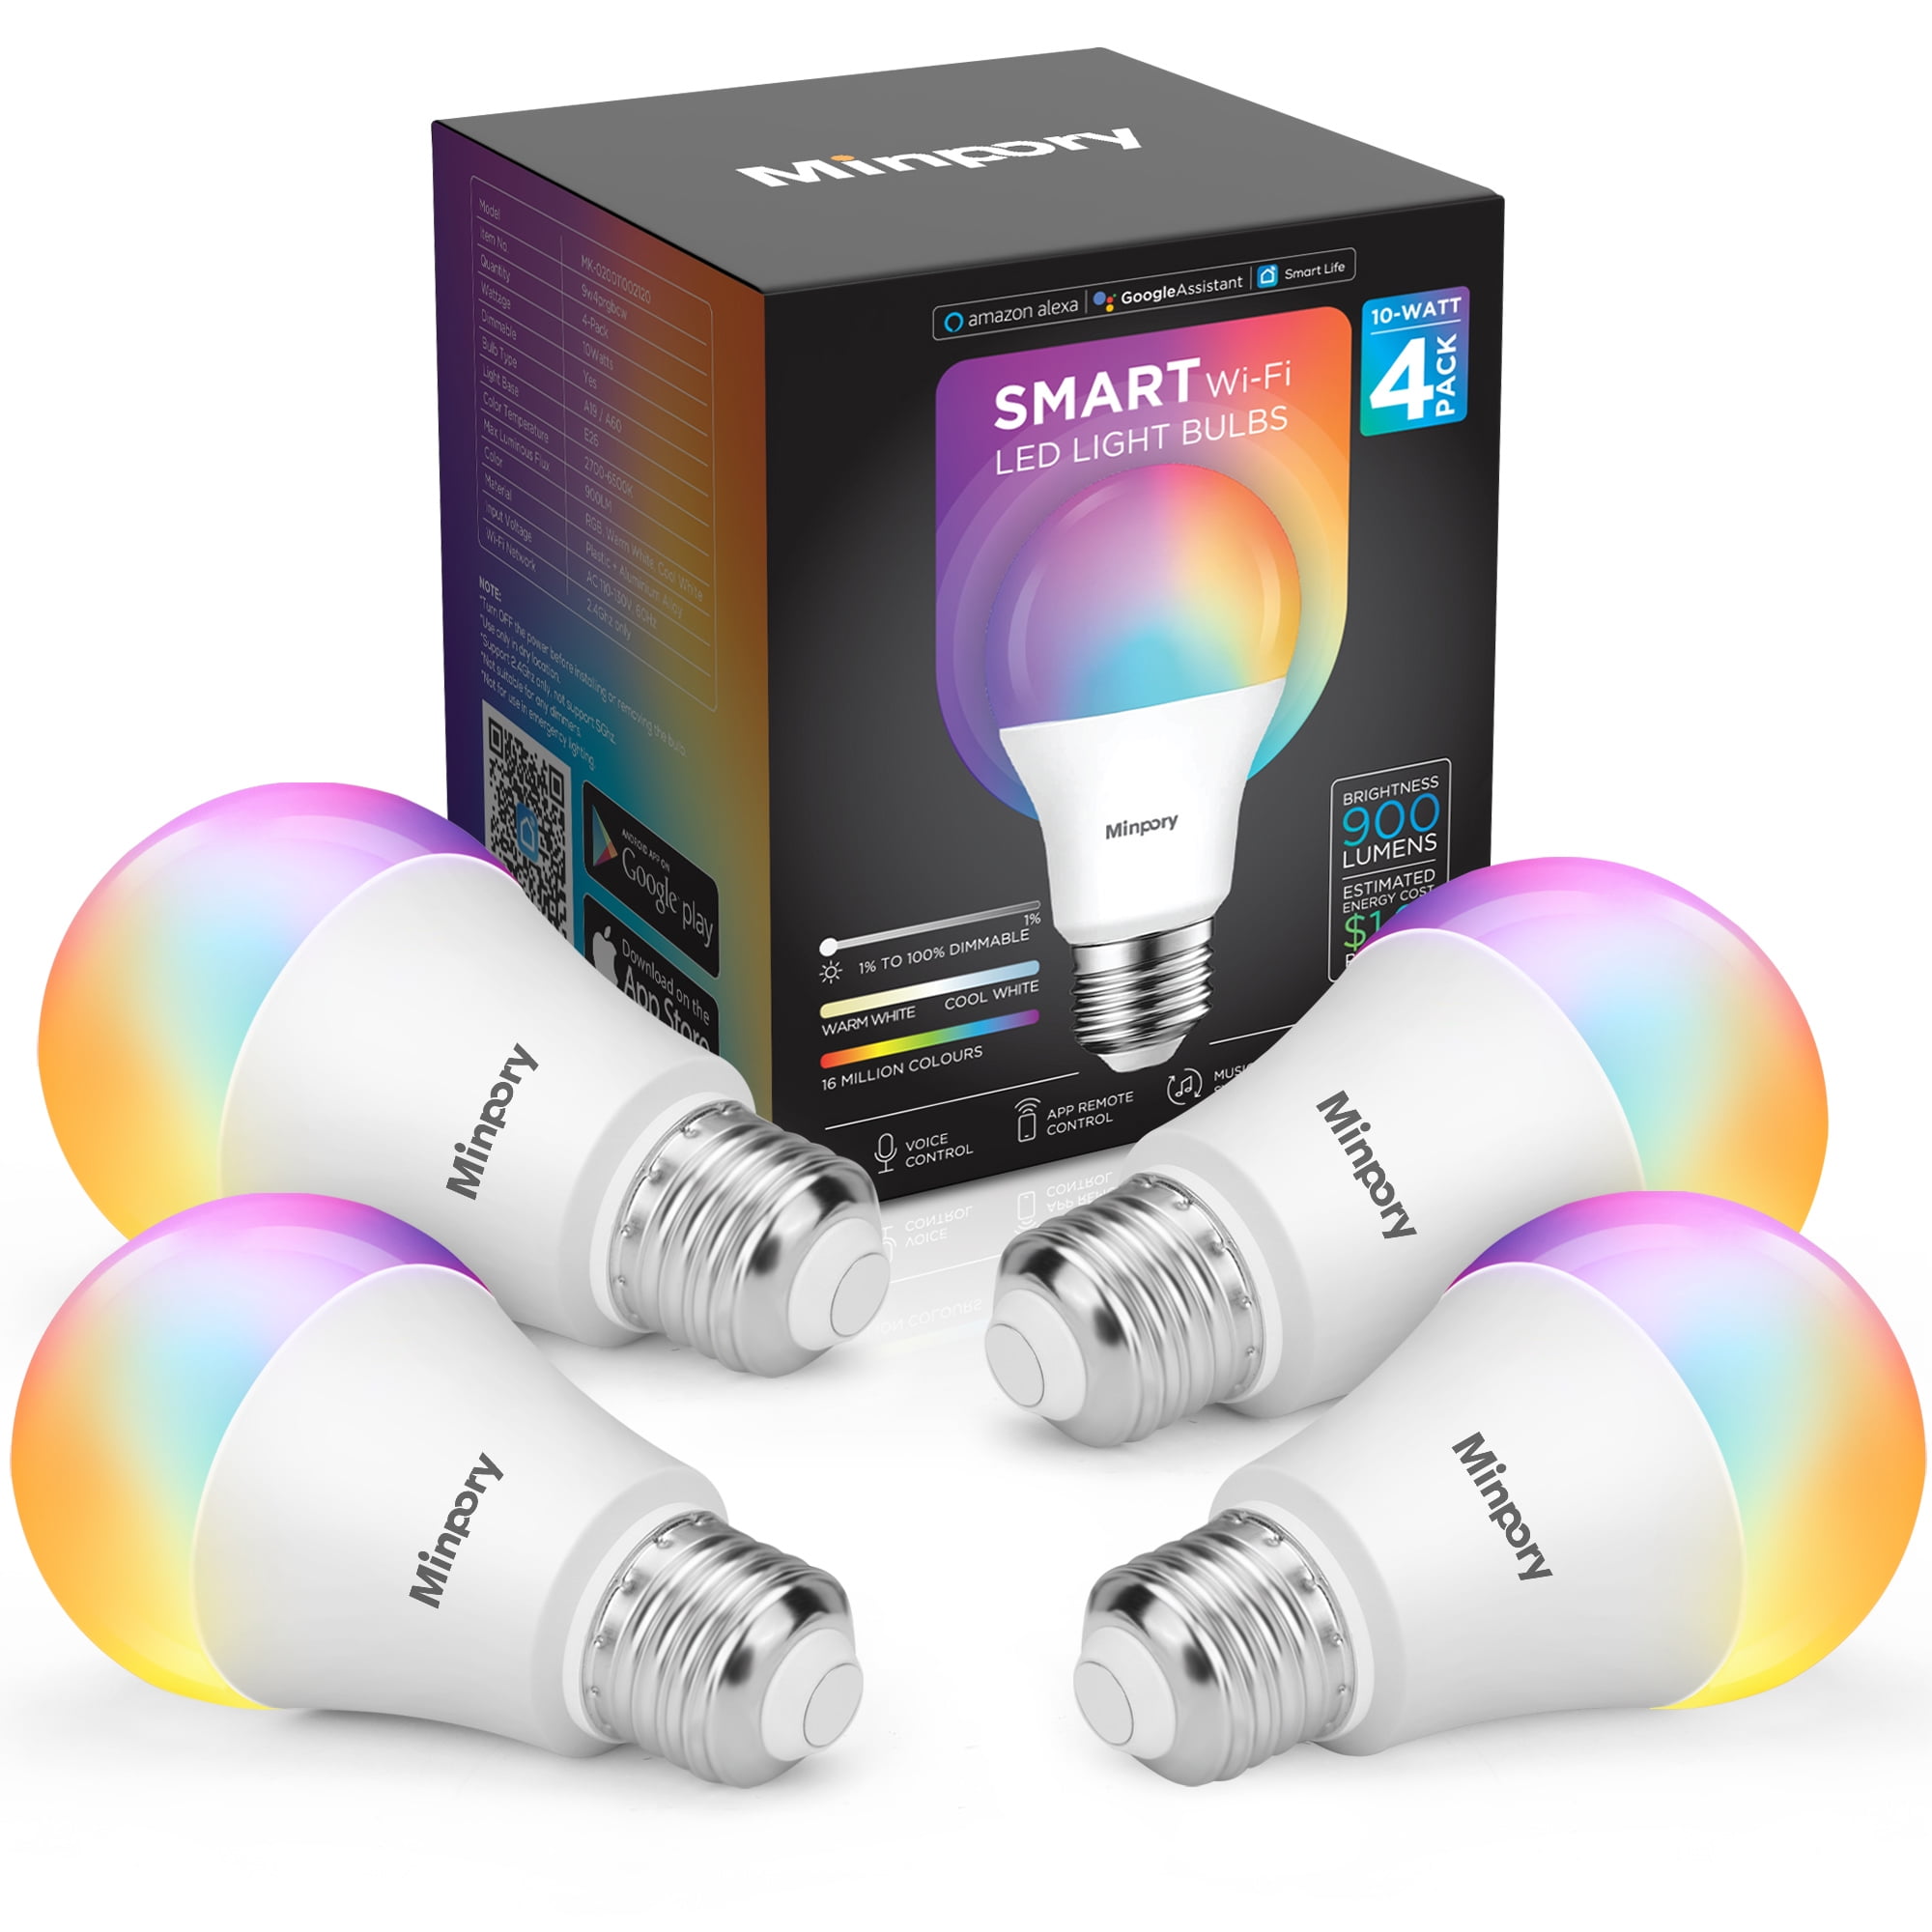 Smart Led Light Bulb 5W WiFi Smart Bulb Cool to Warm White Dimmable LED Light in A19 E26 Base Smartphone App Controlled Compatible with Alexa & Google Home No Hub Required 